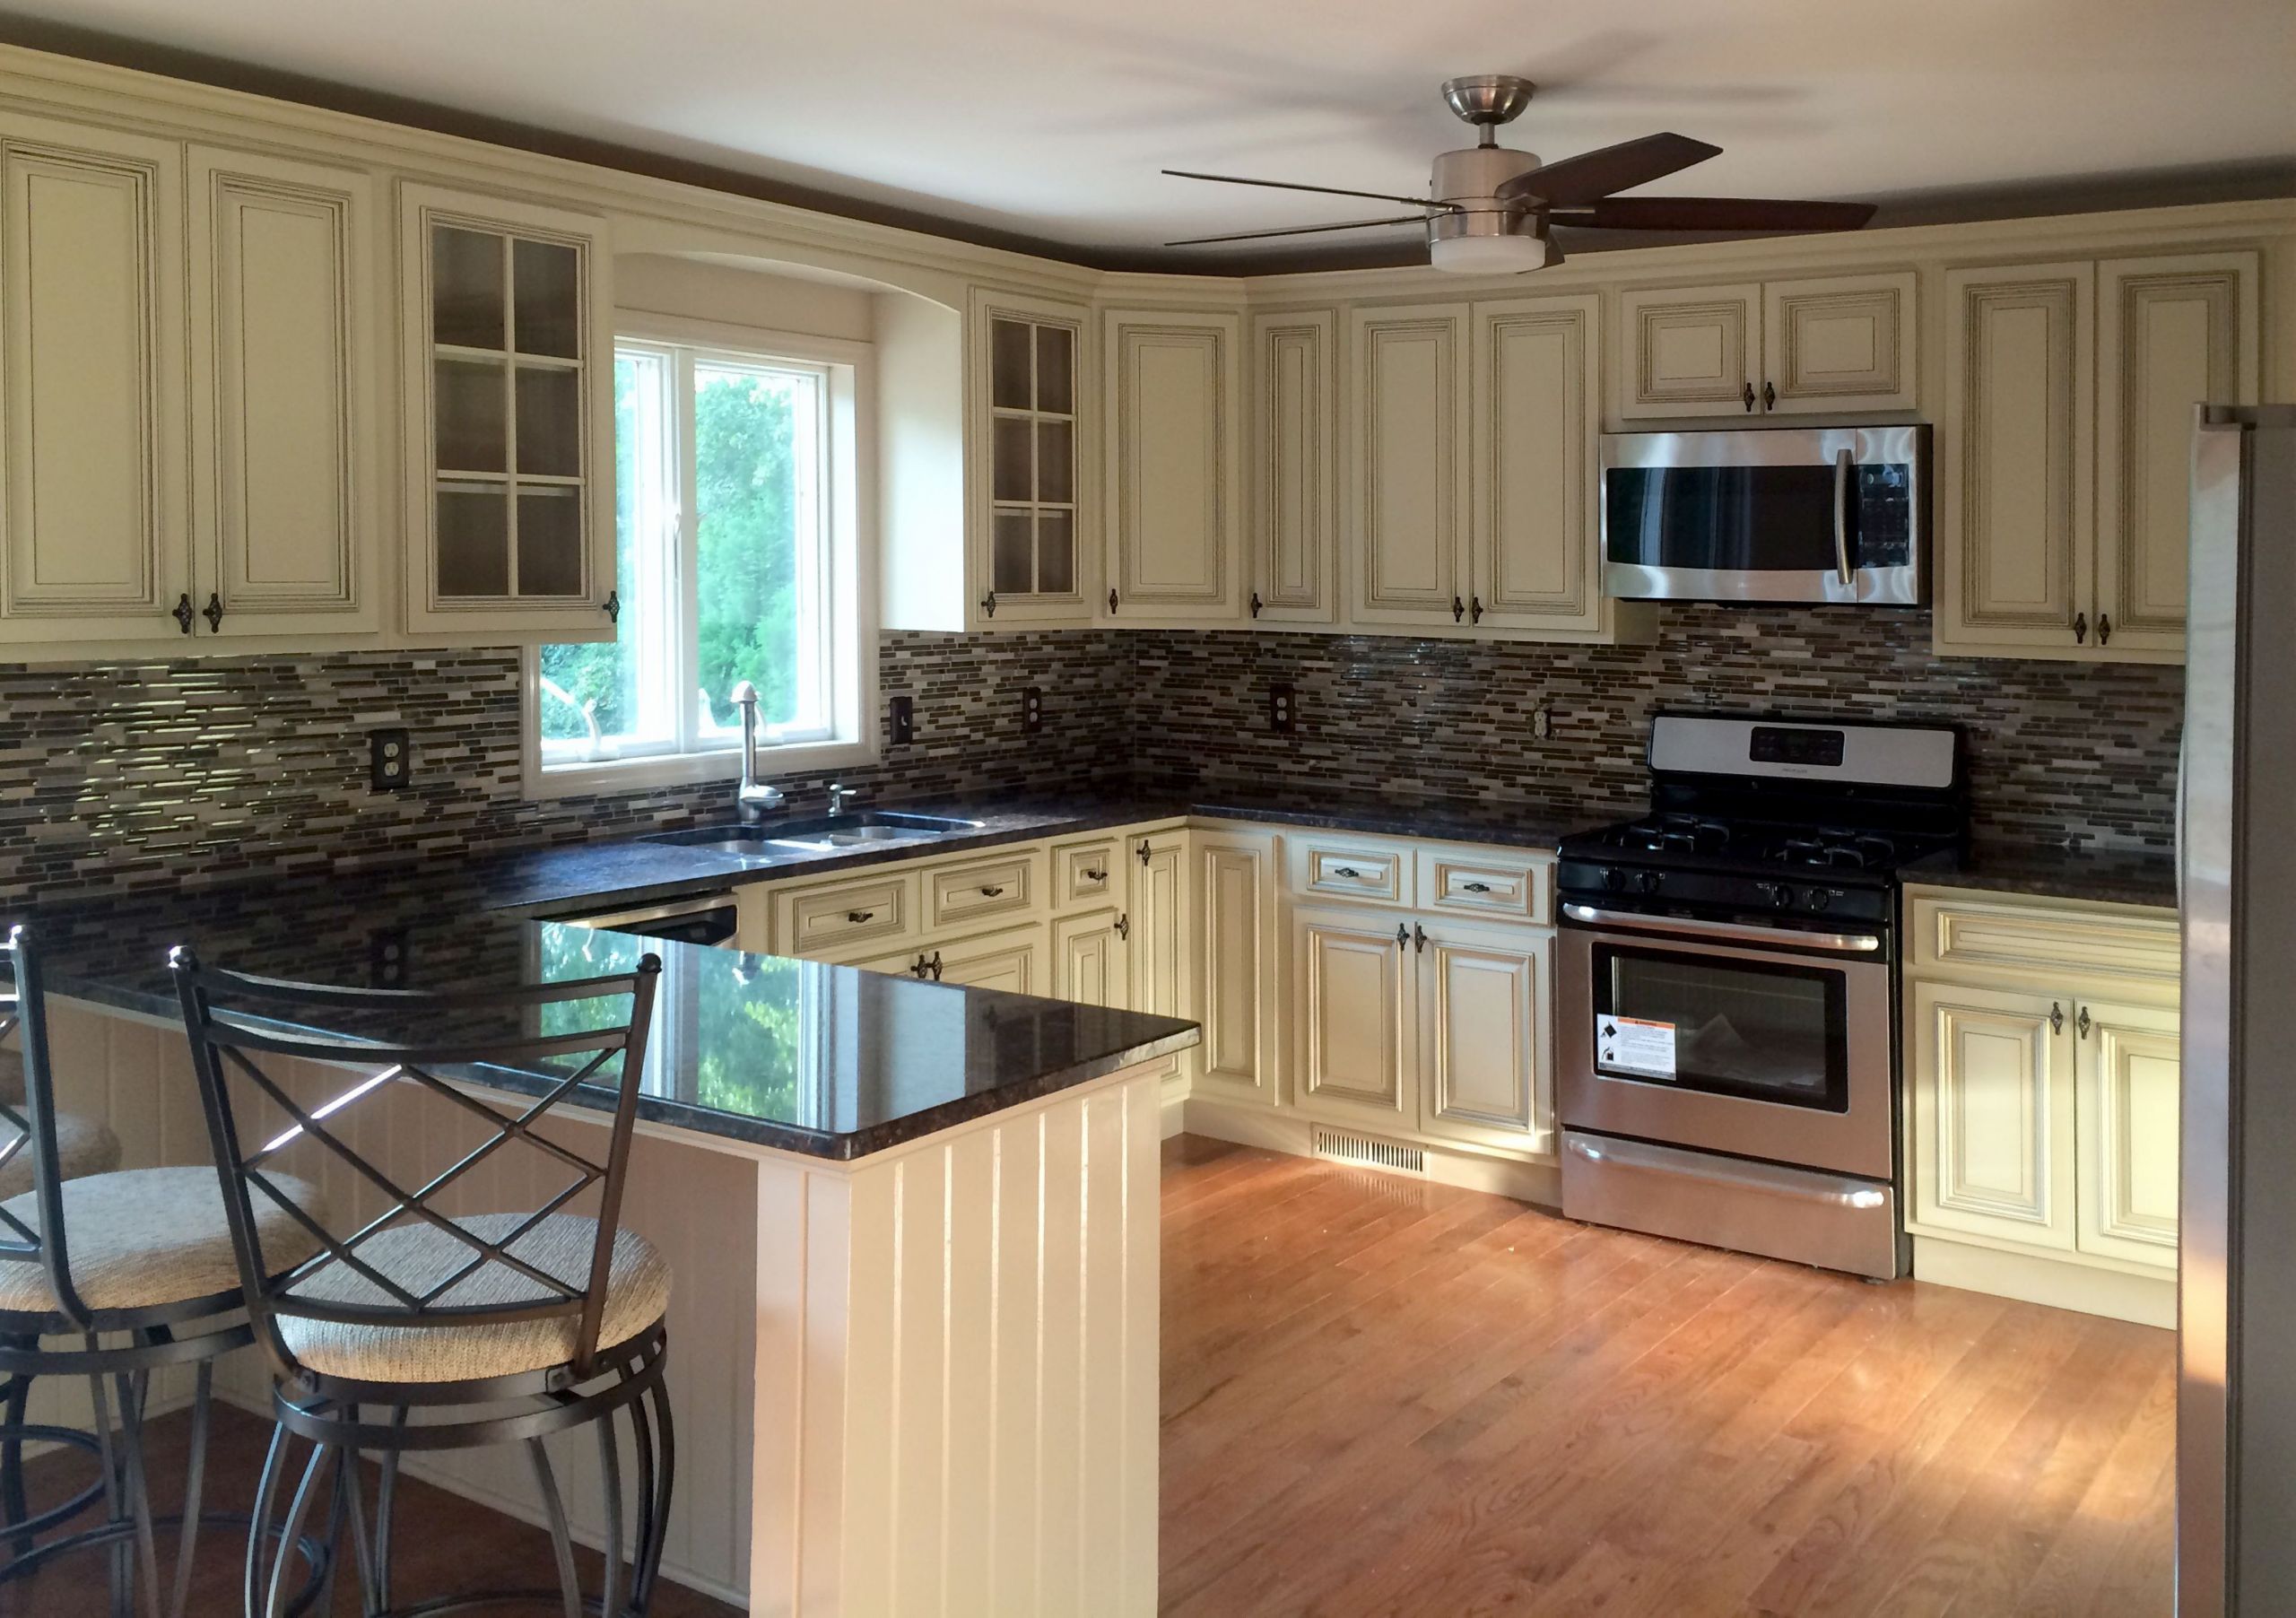 Bargain Outlet Kitchen Cabinets
 FINALIST "An associate of mine had told me to look into